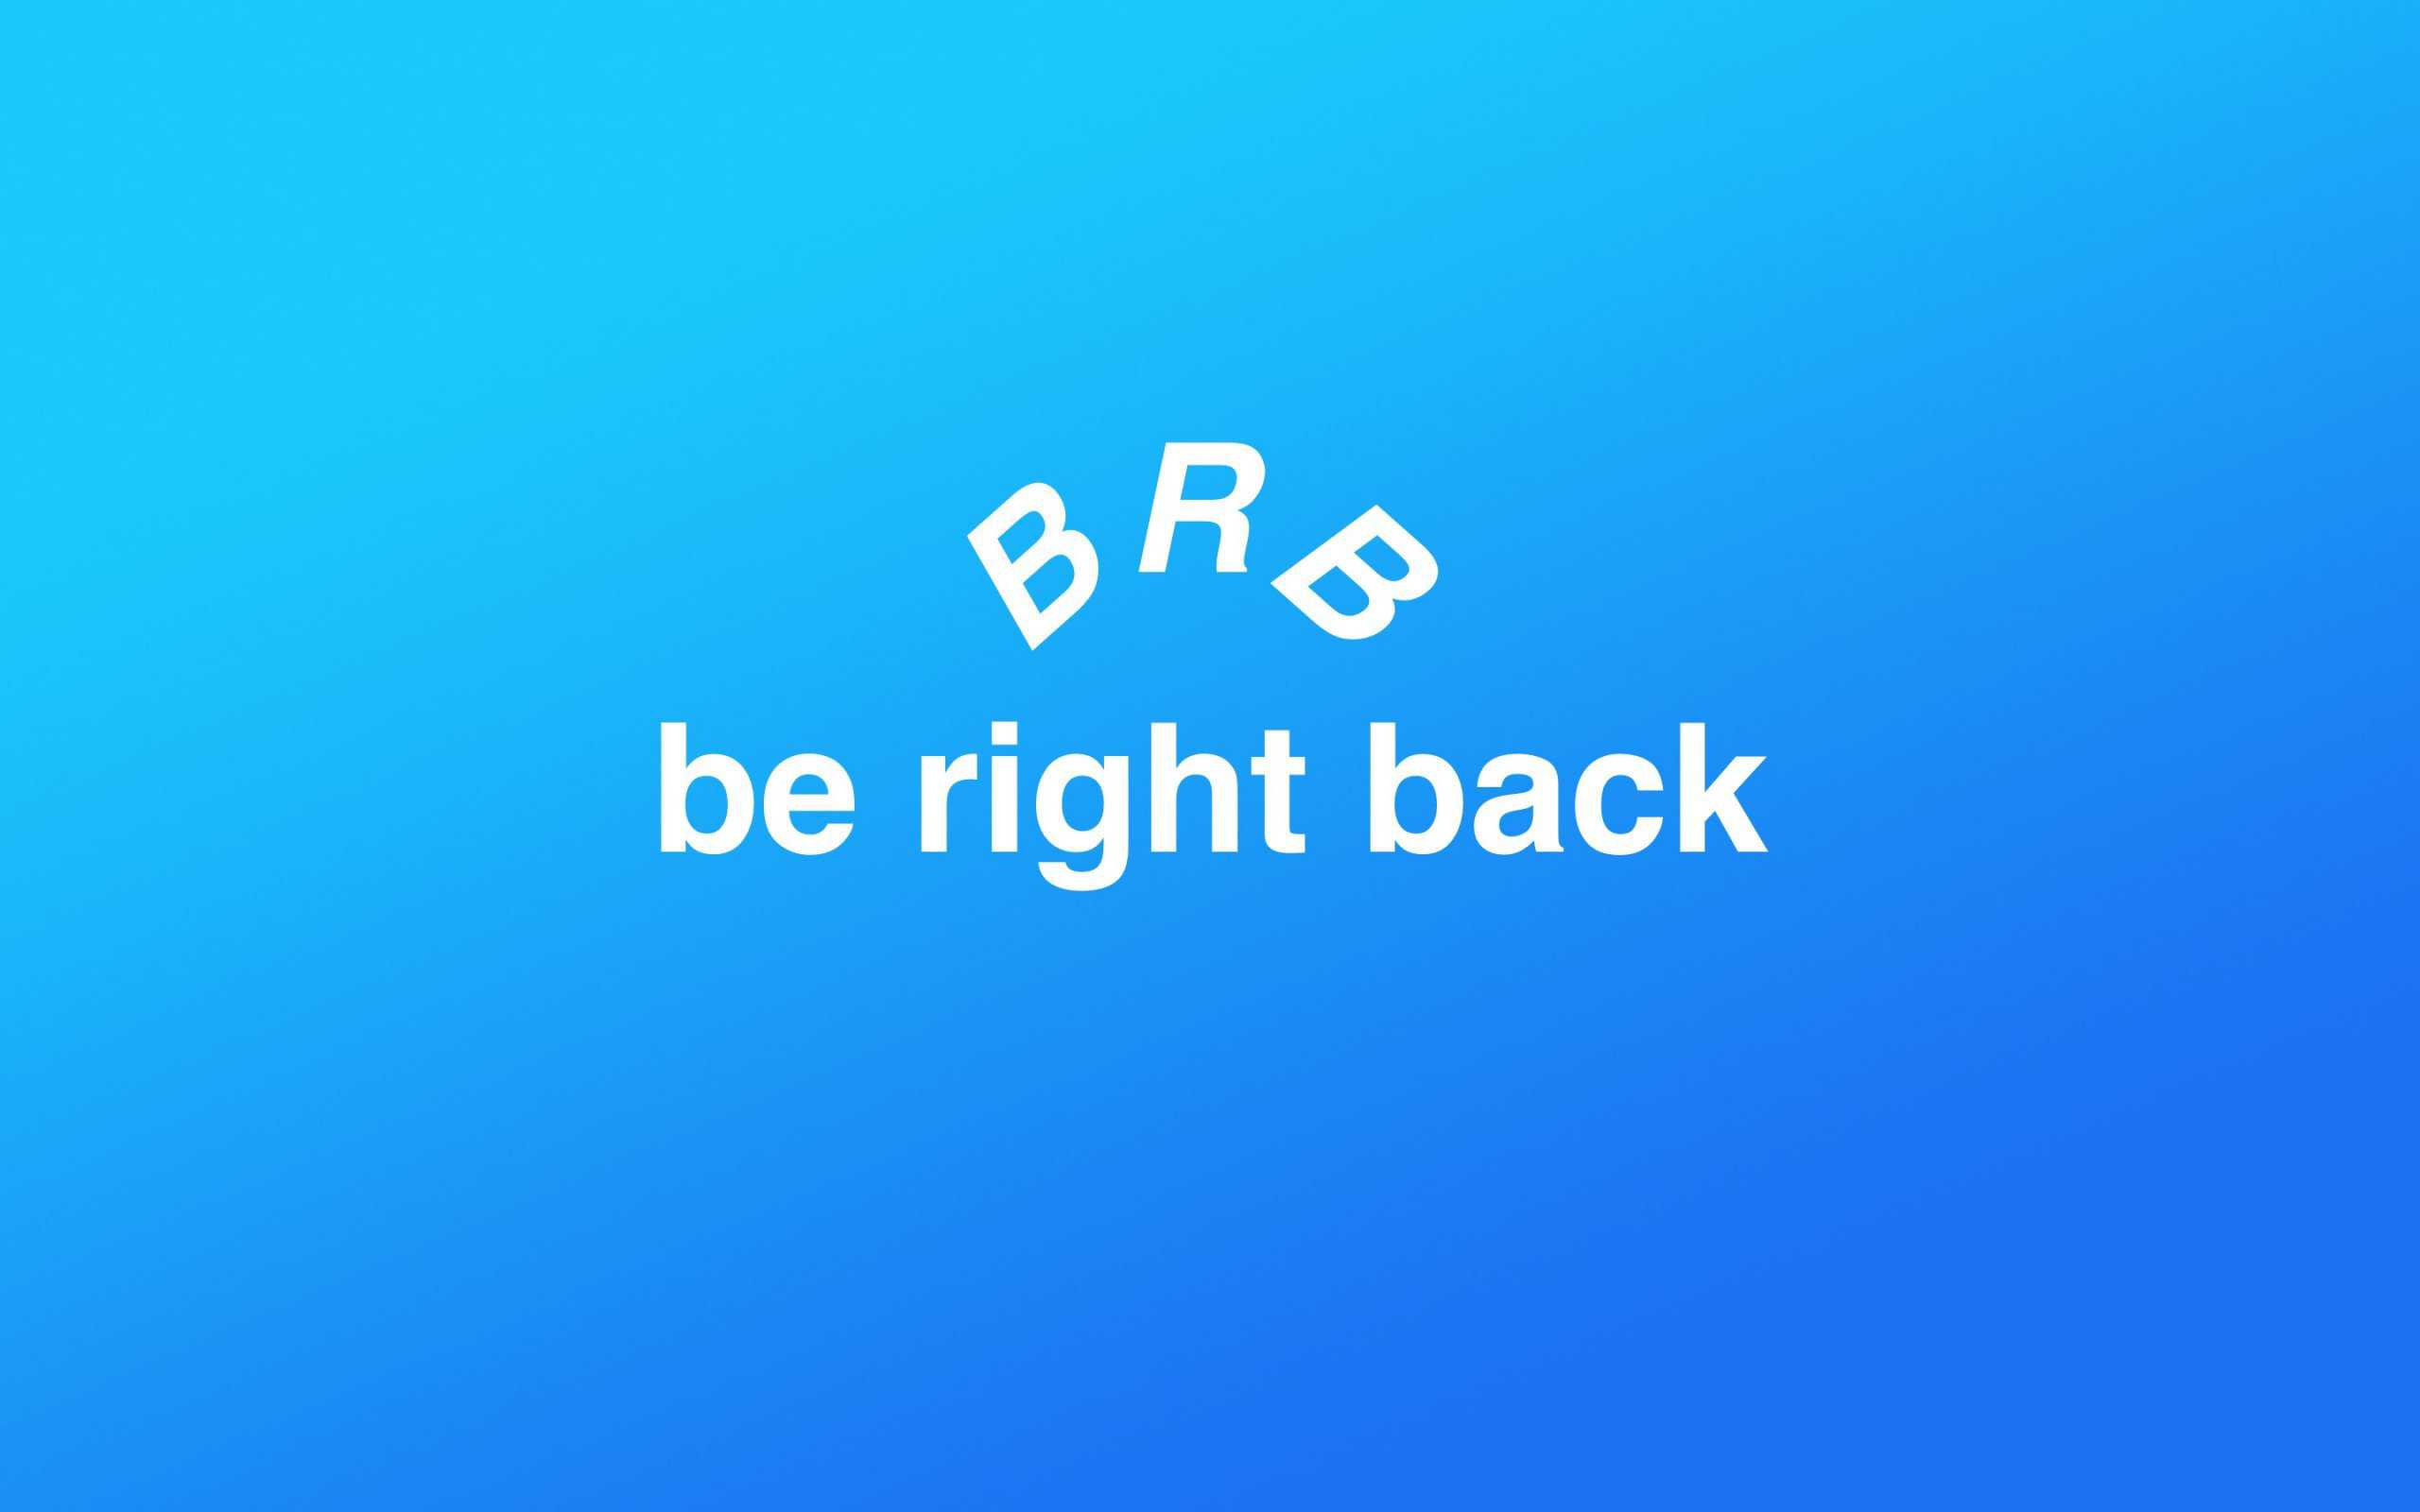 What's the meaning of BRB and How Do I Use It?